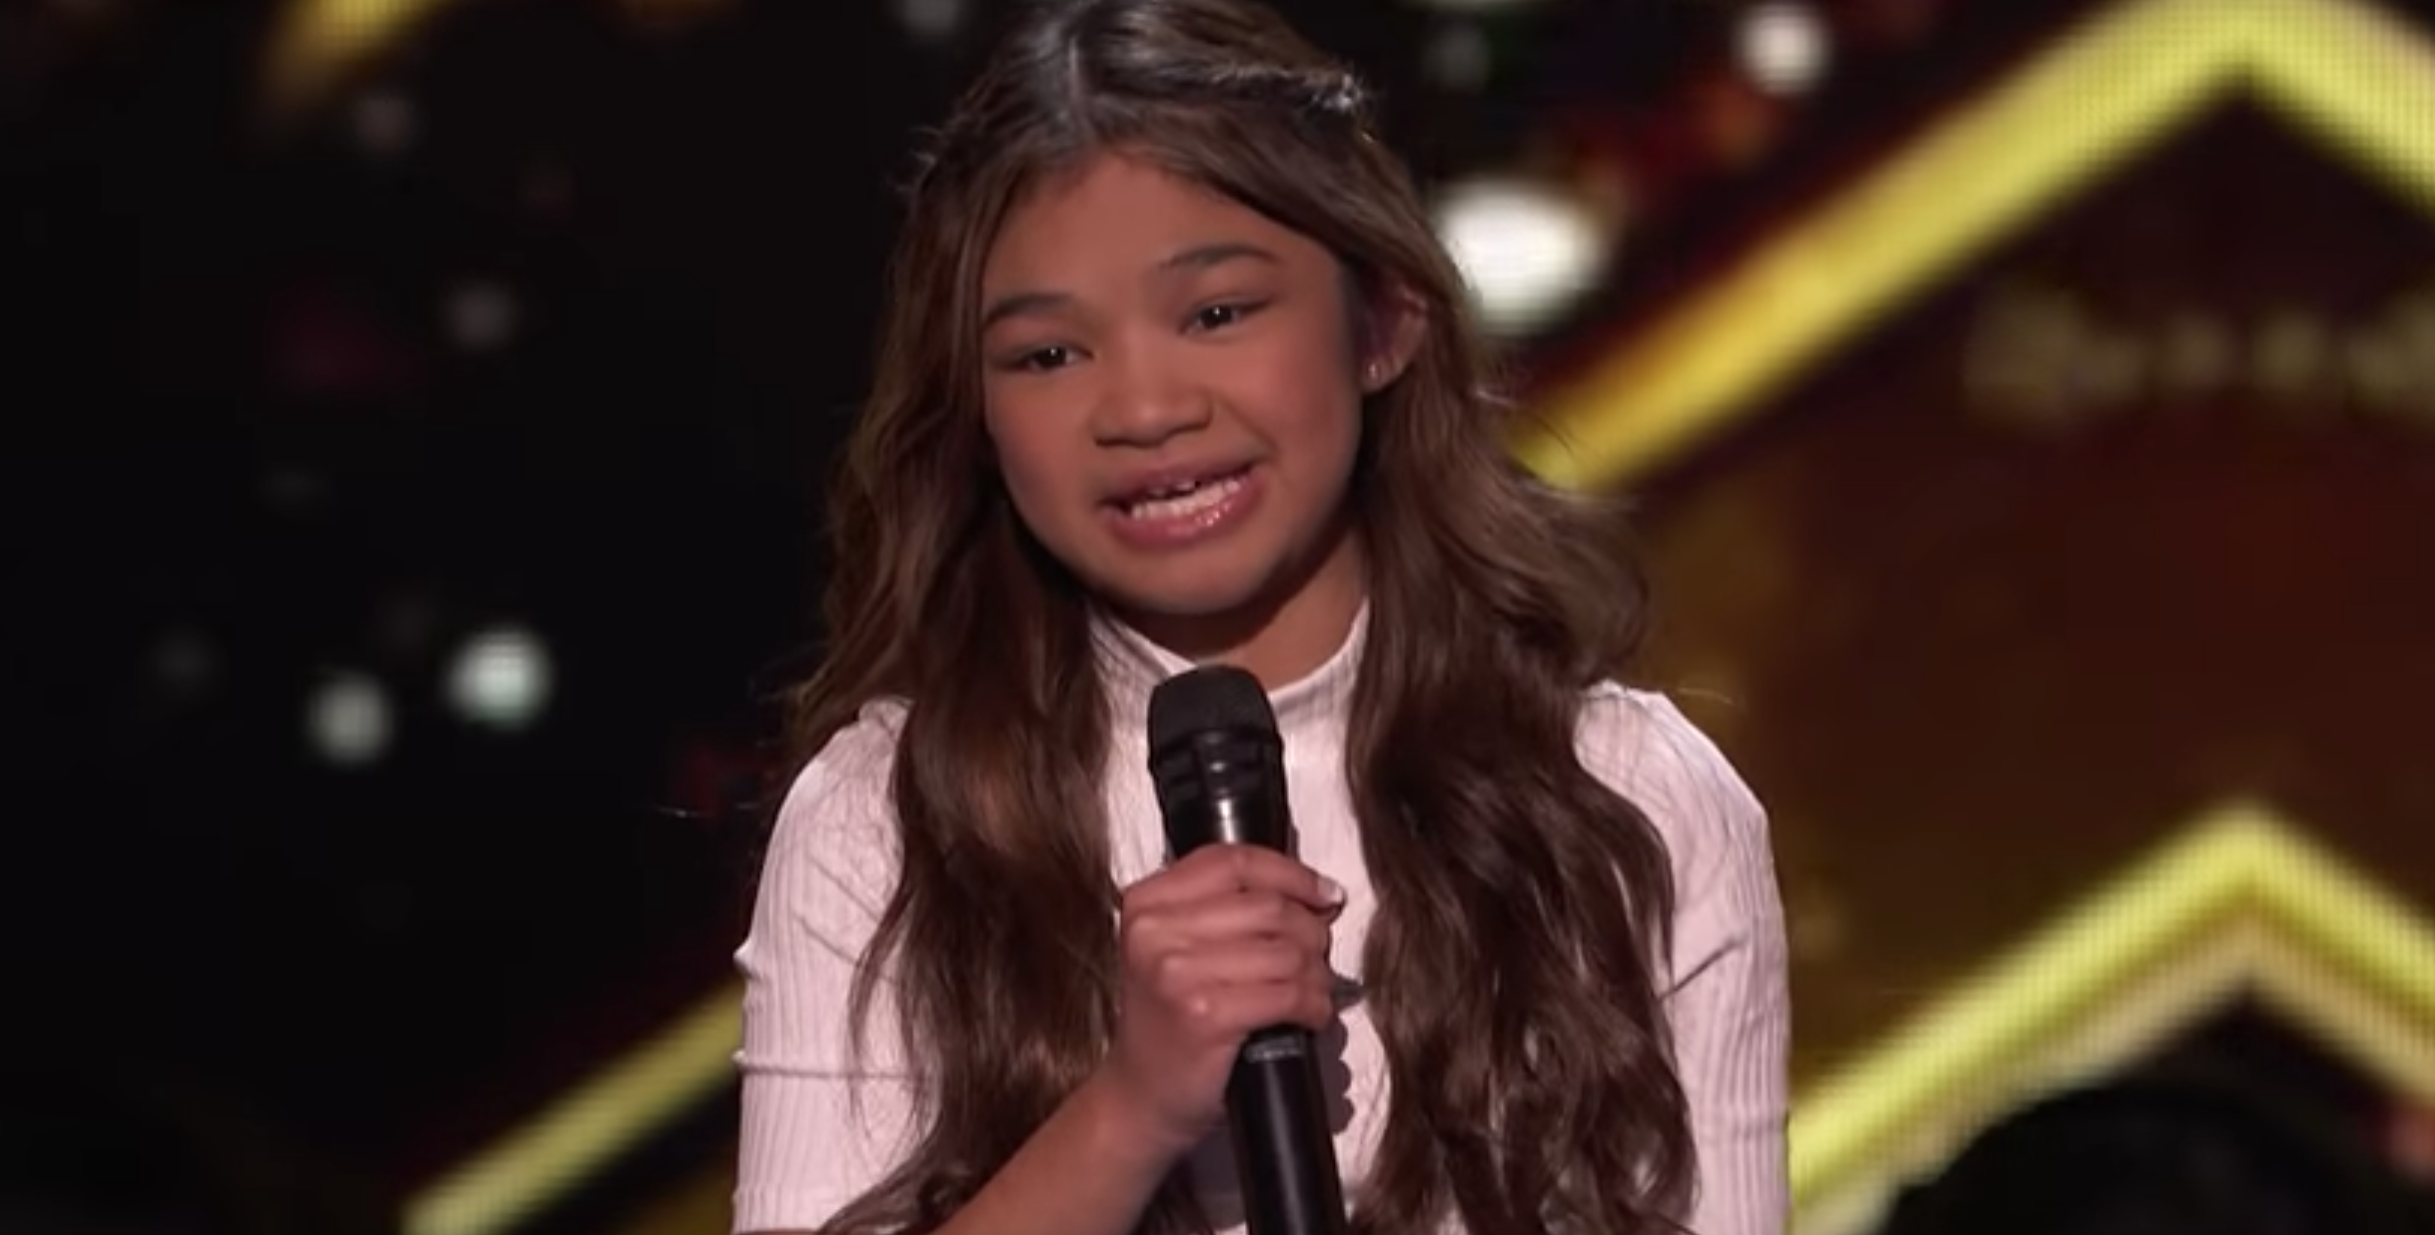 America's Got Talent: The Champions' 2019 Finalist Angelica Hale Talks About Scary Health Struggles